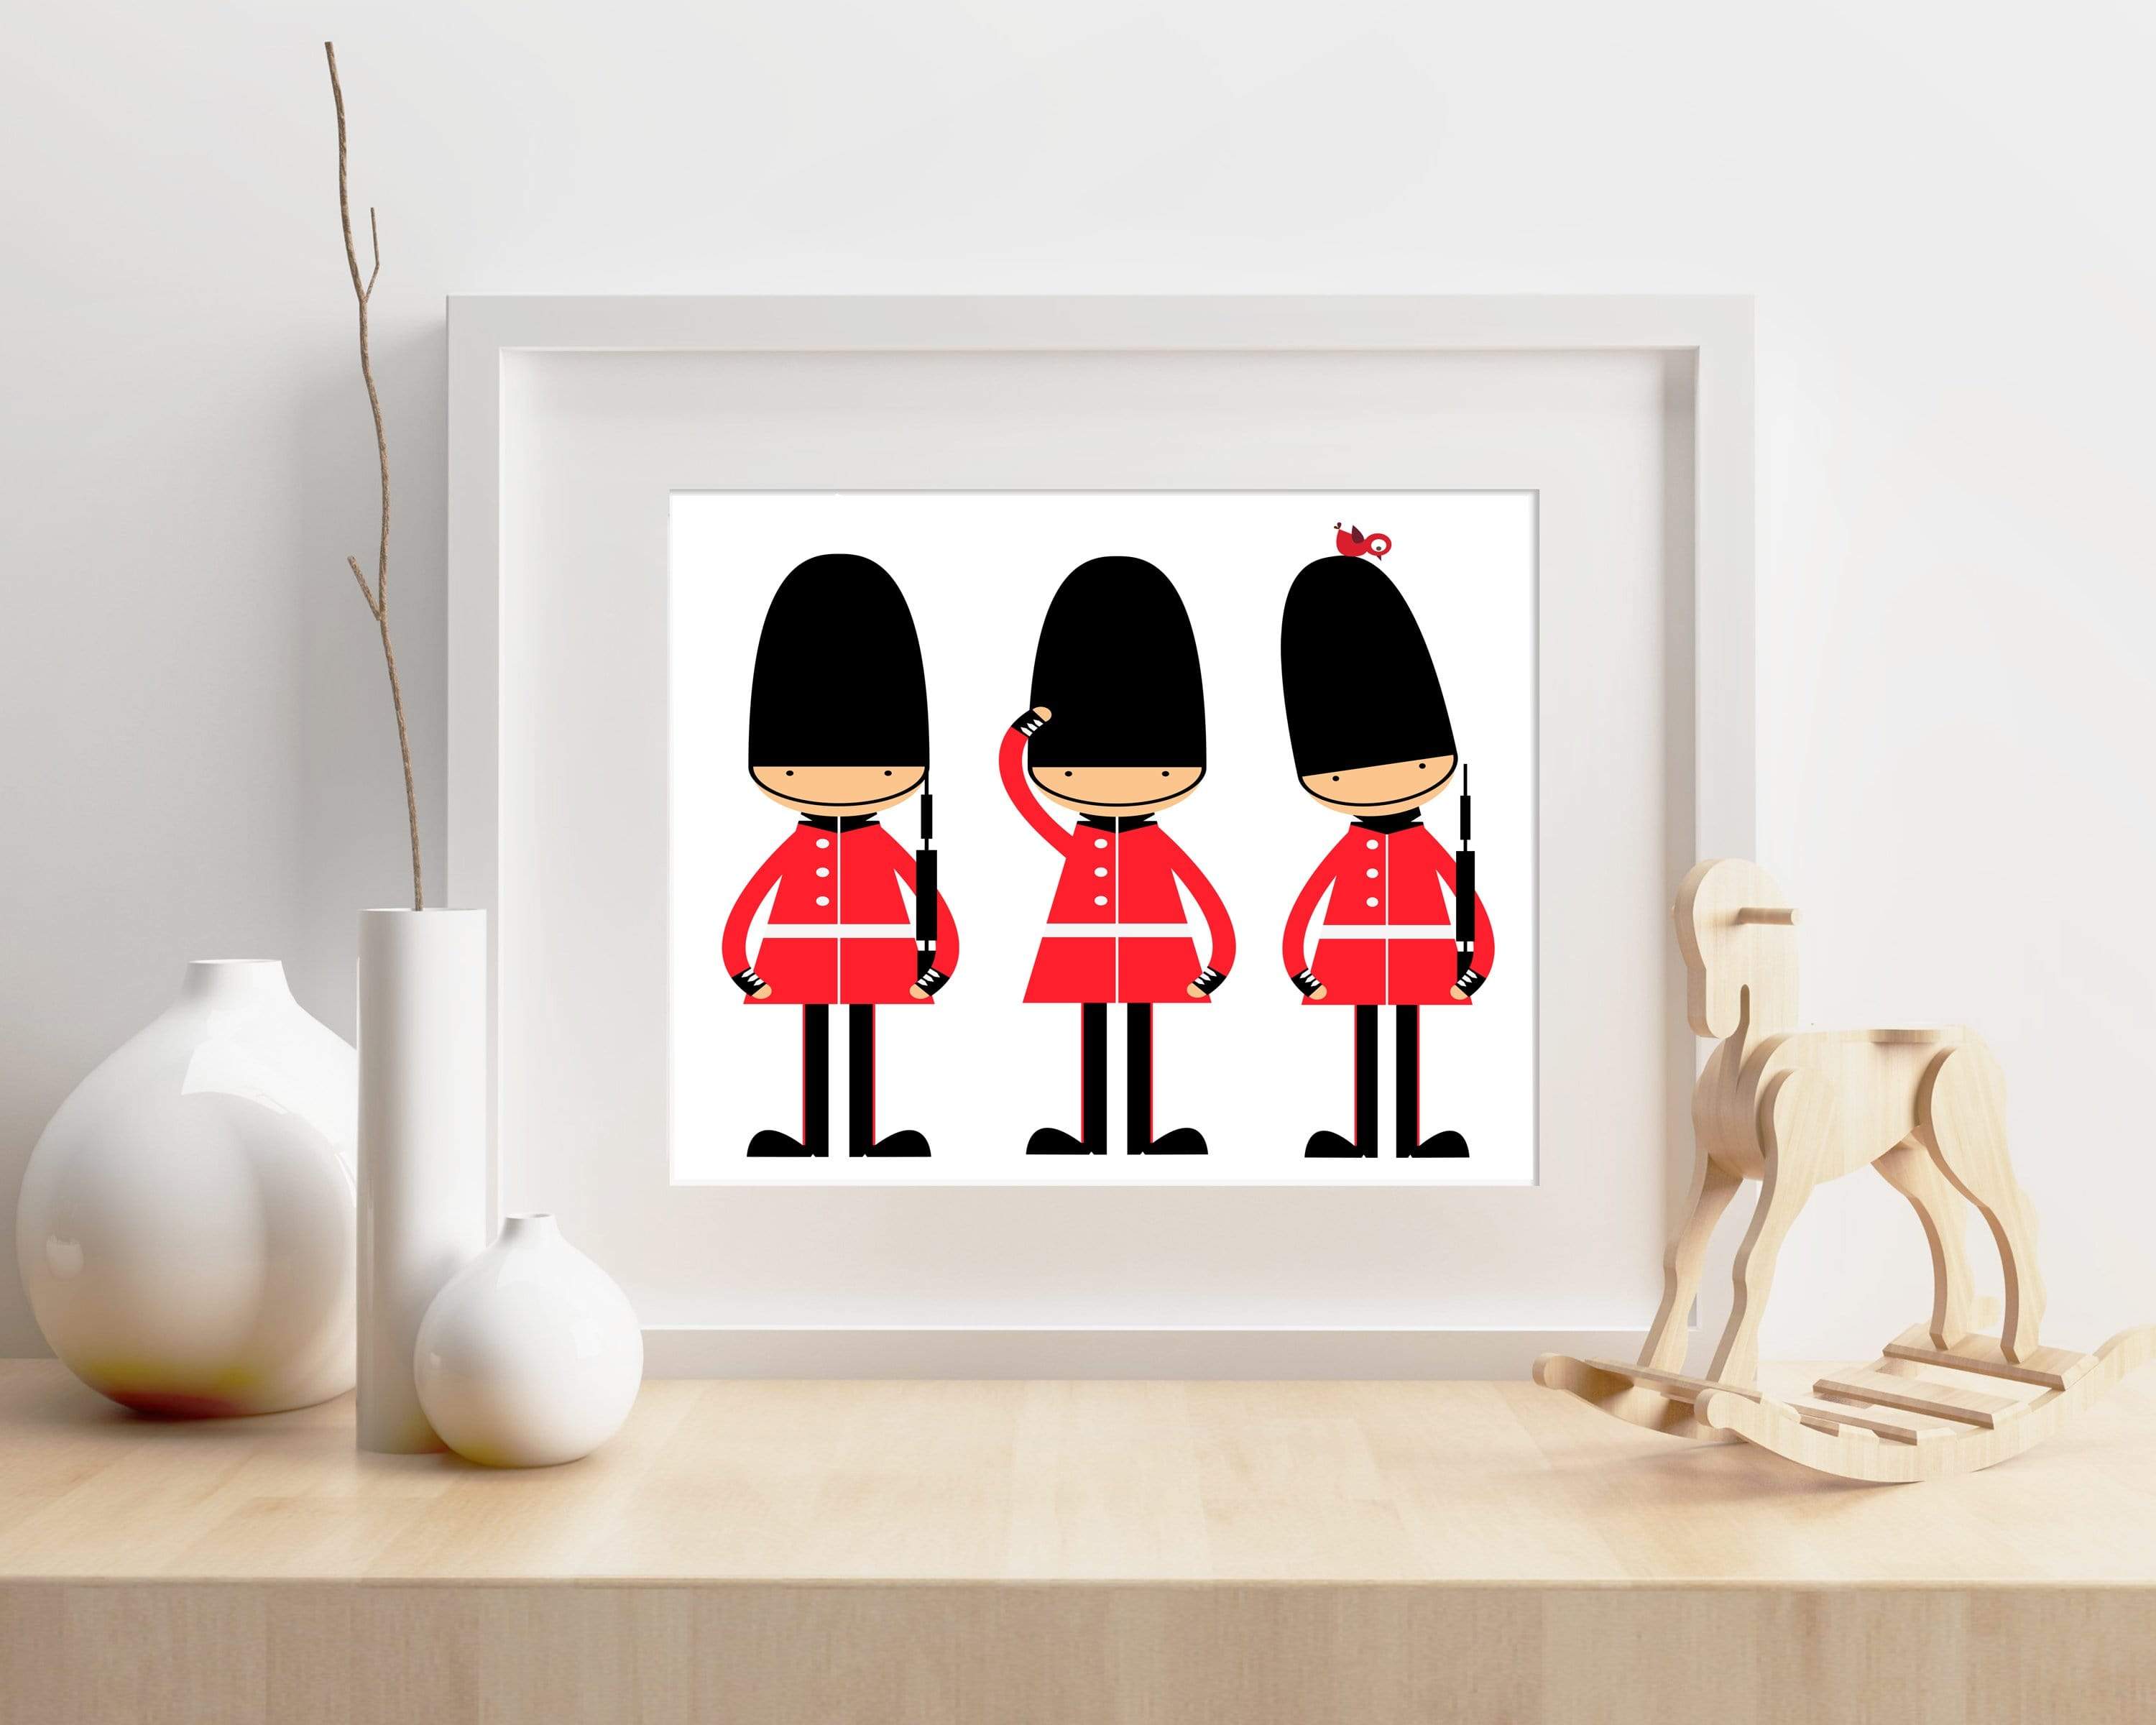 Toy Soldiers Nursery Wall Print,English Guards Nursery Art Print, Nursery Print Decor - H152-Custom Colour nursery art print baby nursery bedroom decor